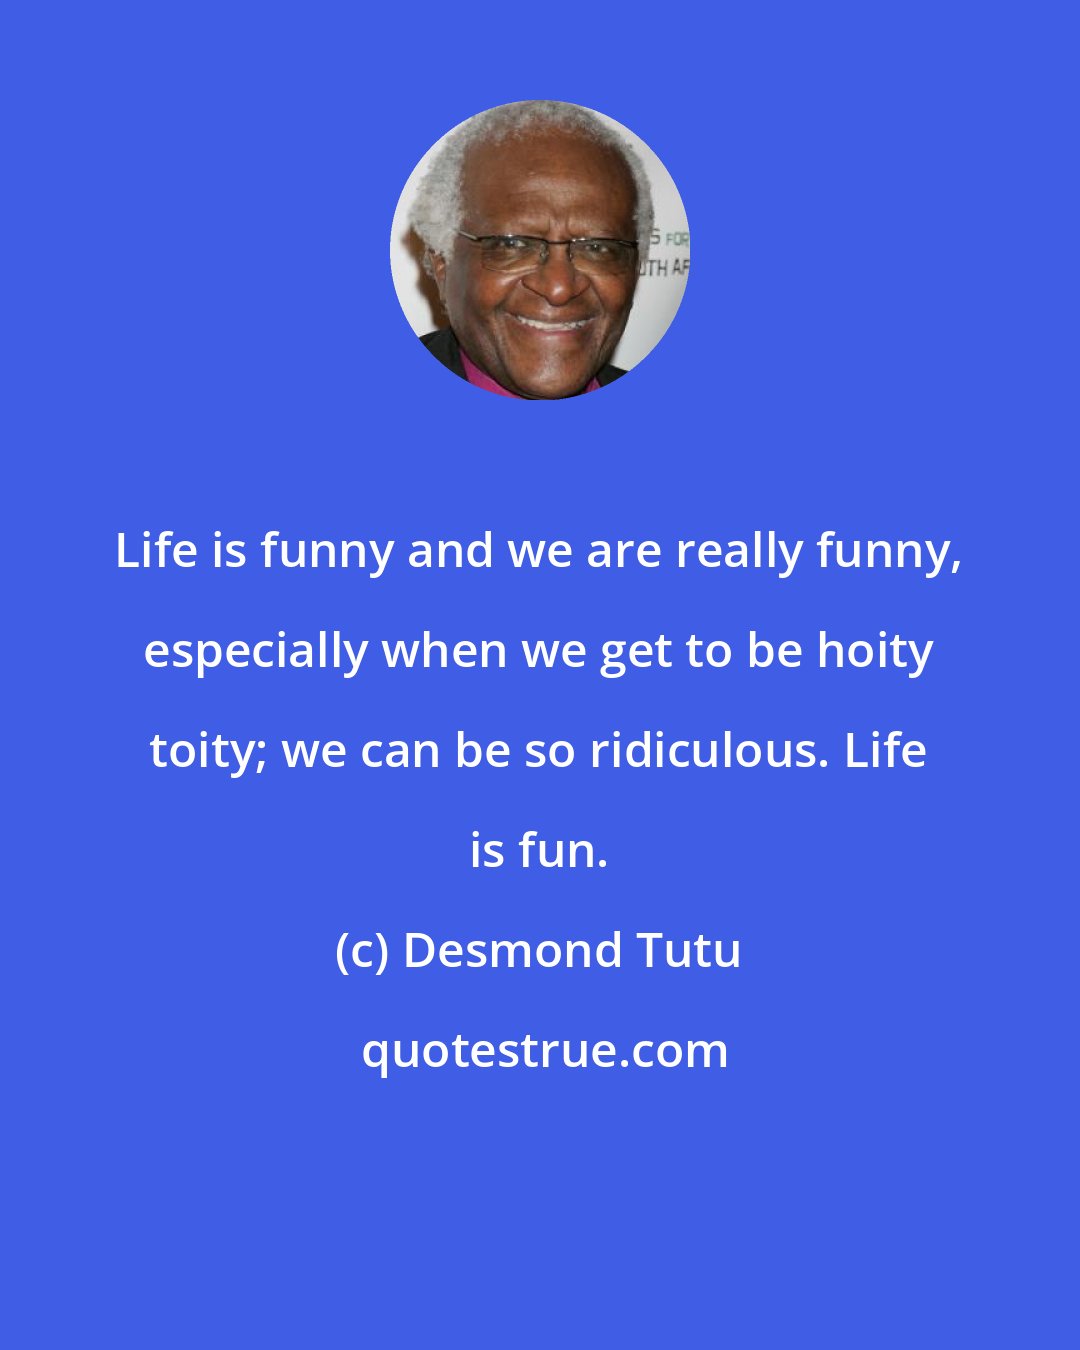 Desmond Tutu: Life is funny and we are really funny, especially when we get to be hoity toity; we can be so ridiculous. Life is fun.